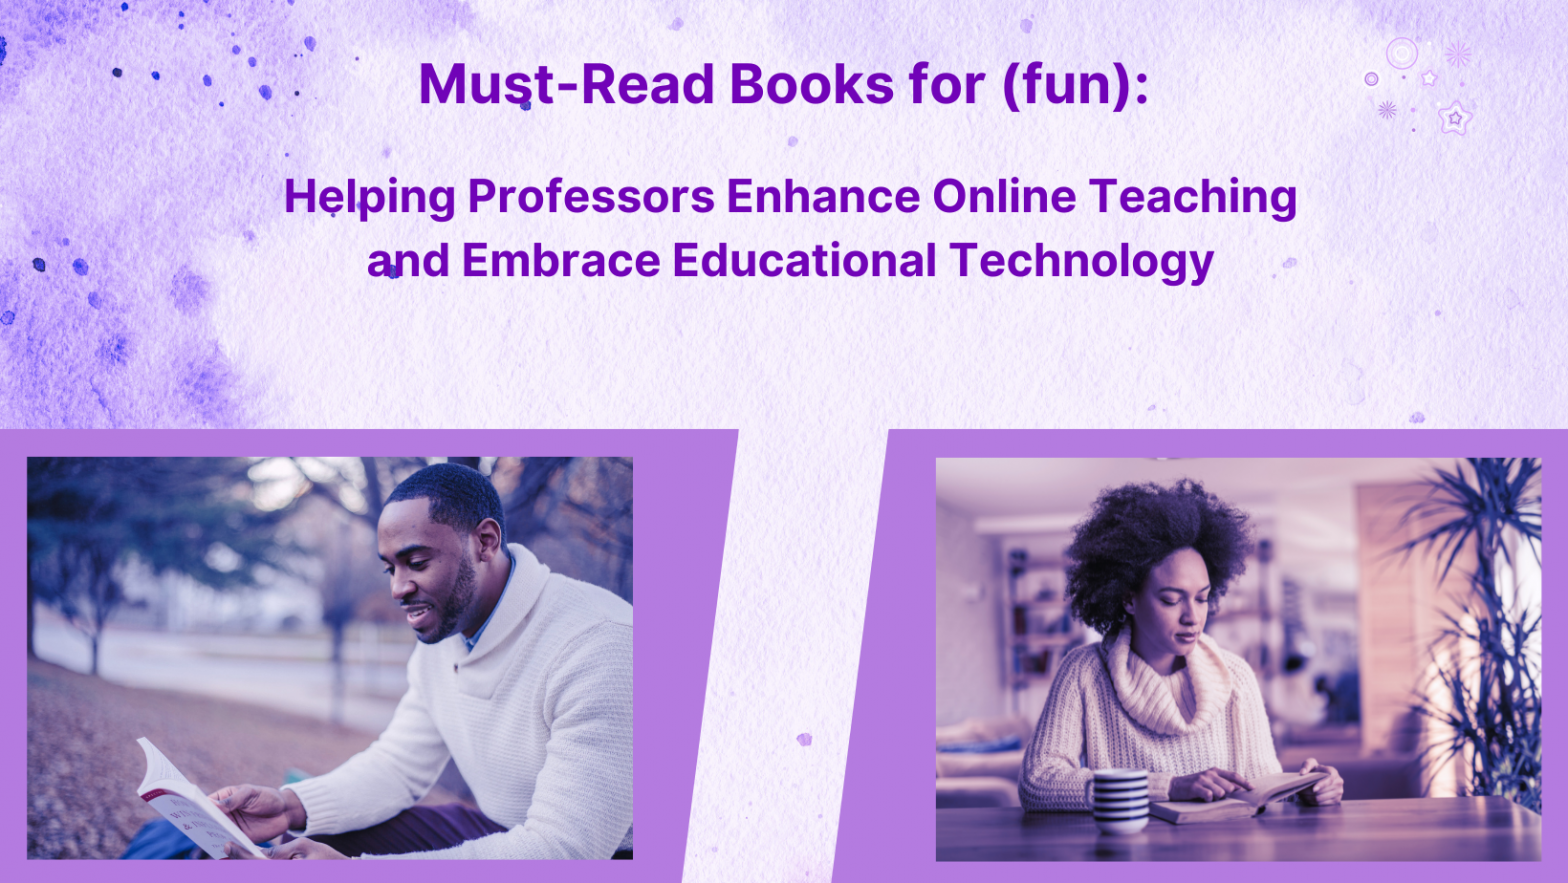 Must-Read Books for (fun): Helping Professors Enhance Online Teaching and Embrace Educational Technology